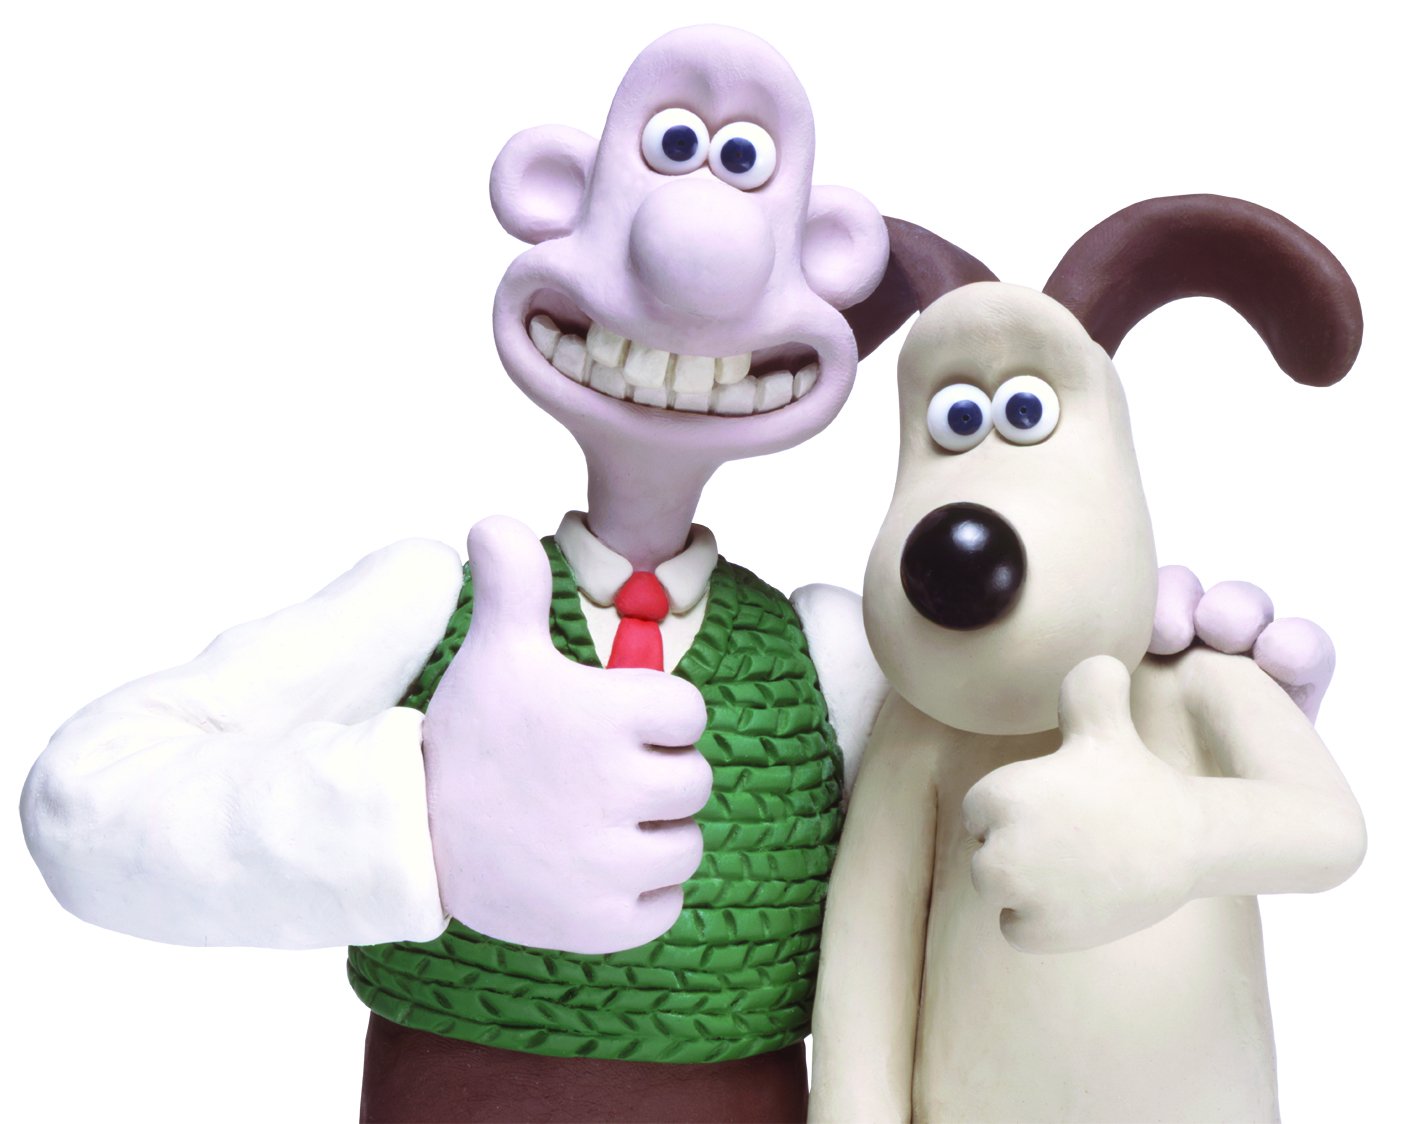 Who doesn't love Wallace and Gromit? Check out their charity work too